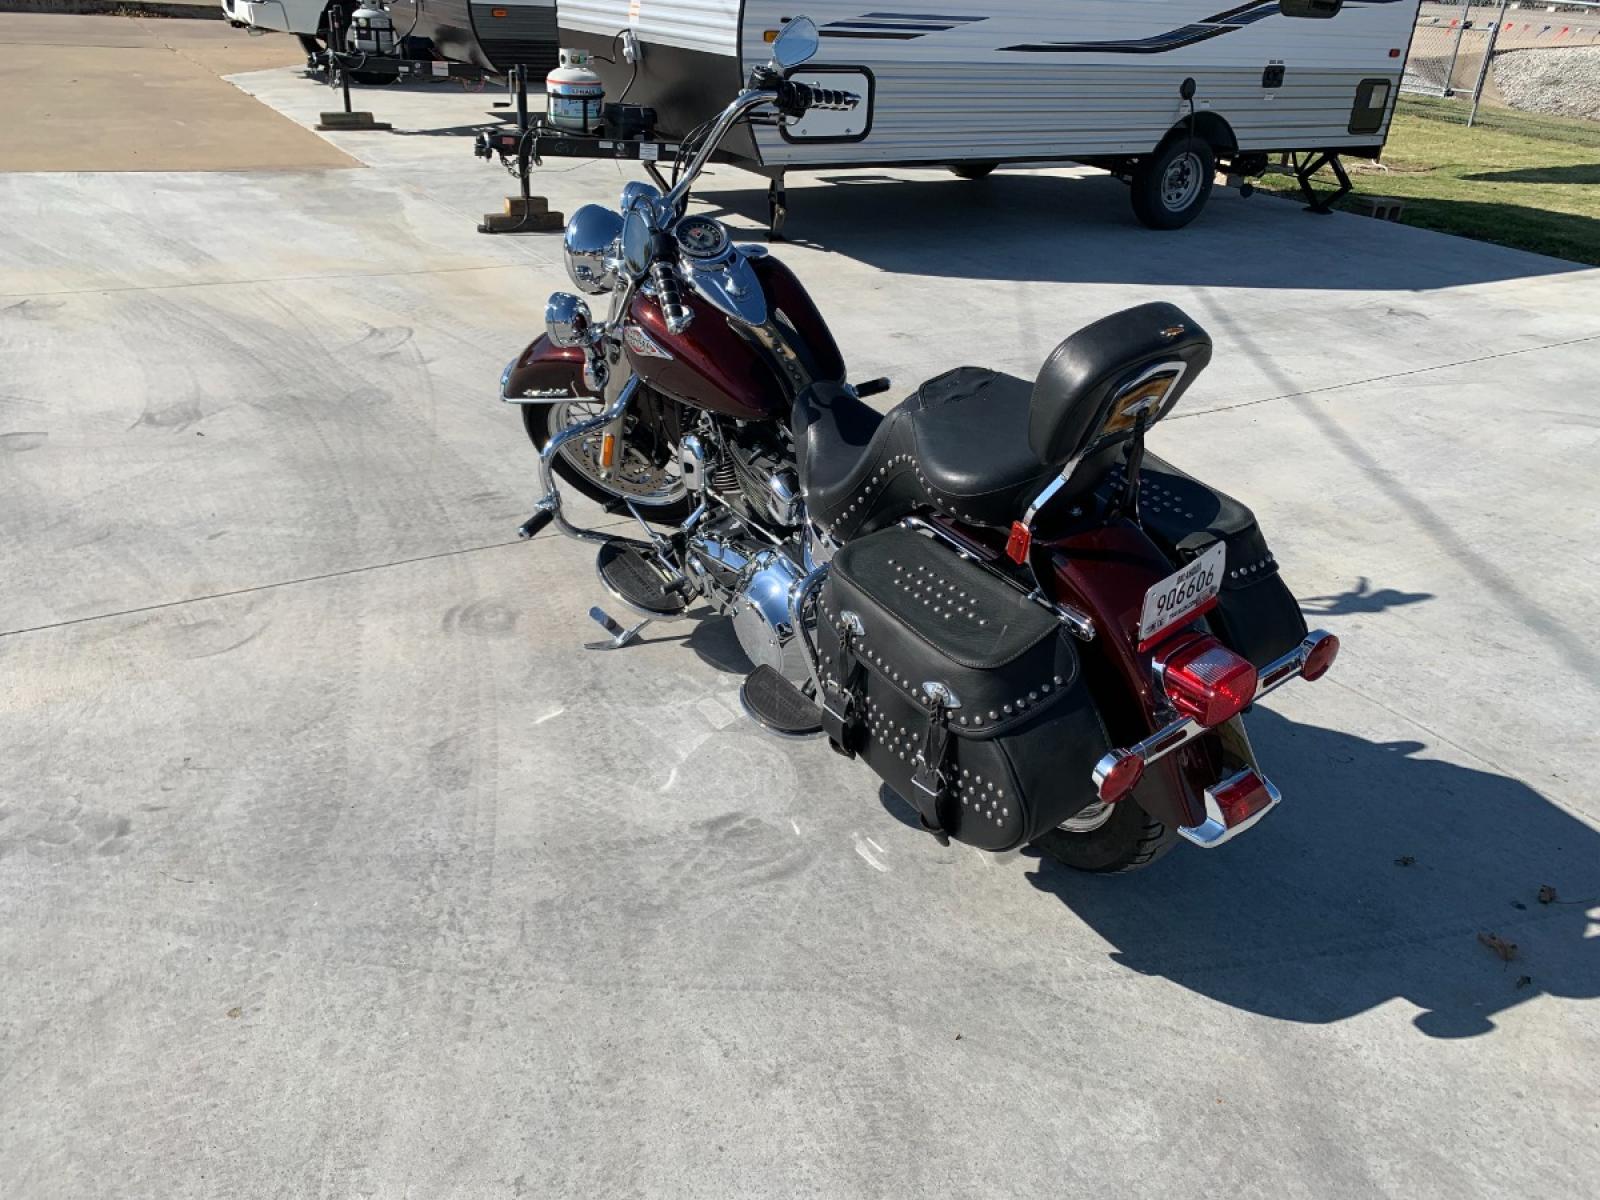 2009 PURPLE Harley-Davidson FLSTC - (1HD1BW5199Y) , located at 17760 HWY 62, MORRIS, 74445, 35.609104, -95.877060 - 2009 HARLEY- DAVIDSON FLSTC HERITAGE SOFTAIL 1584CC FEATURES CRUISE CONTROL, CHROME PASSING LAMPS, CHROME STAGGERED SHORTY EXHAUST WITH DUAL MUFFLERS, STUDDED LEATHER SADDLEBAGS, AND A FULL WINDSHIELD. A SMOOTH RIDE FOR LONG-RANGE TOURING COMFORT. IT RUNS GREAT !! ONLY 14,596 MILES. ** REBUILT TITLE - Photo #8